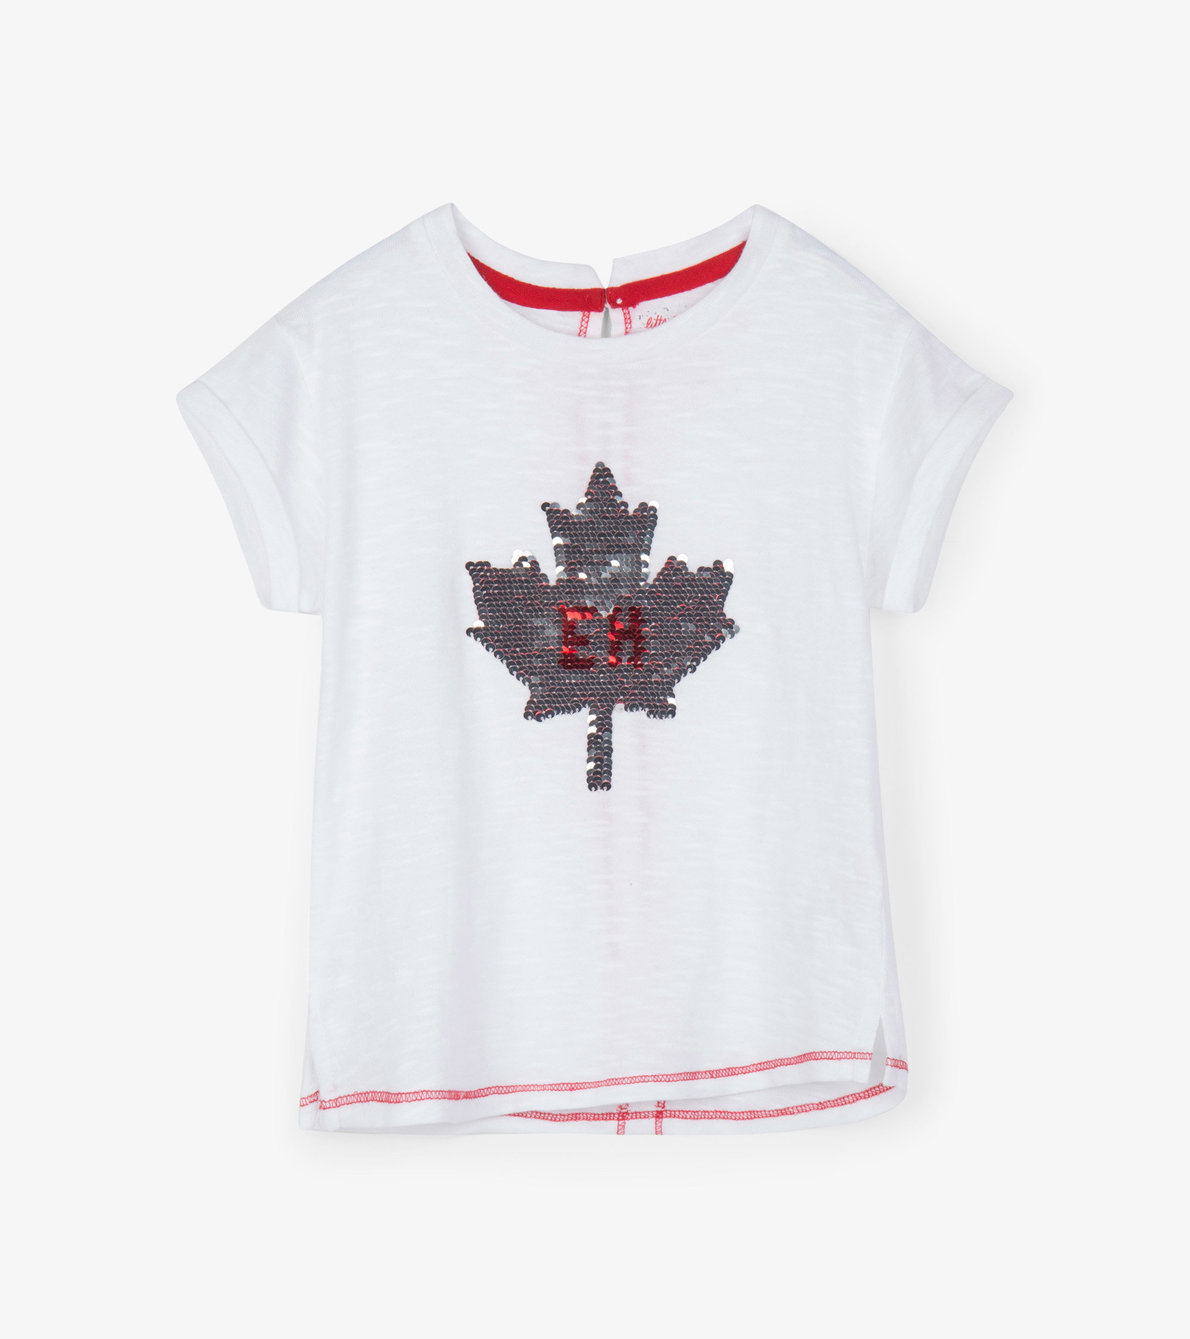 View larger image of Maple Leaf Flip Sequin Kids Tee